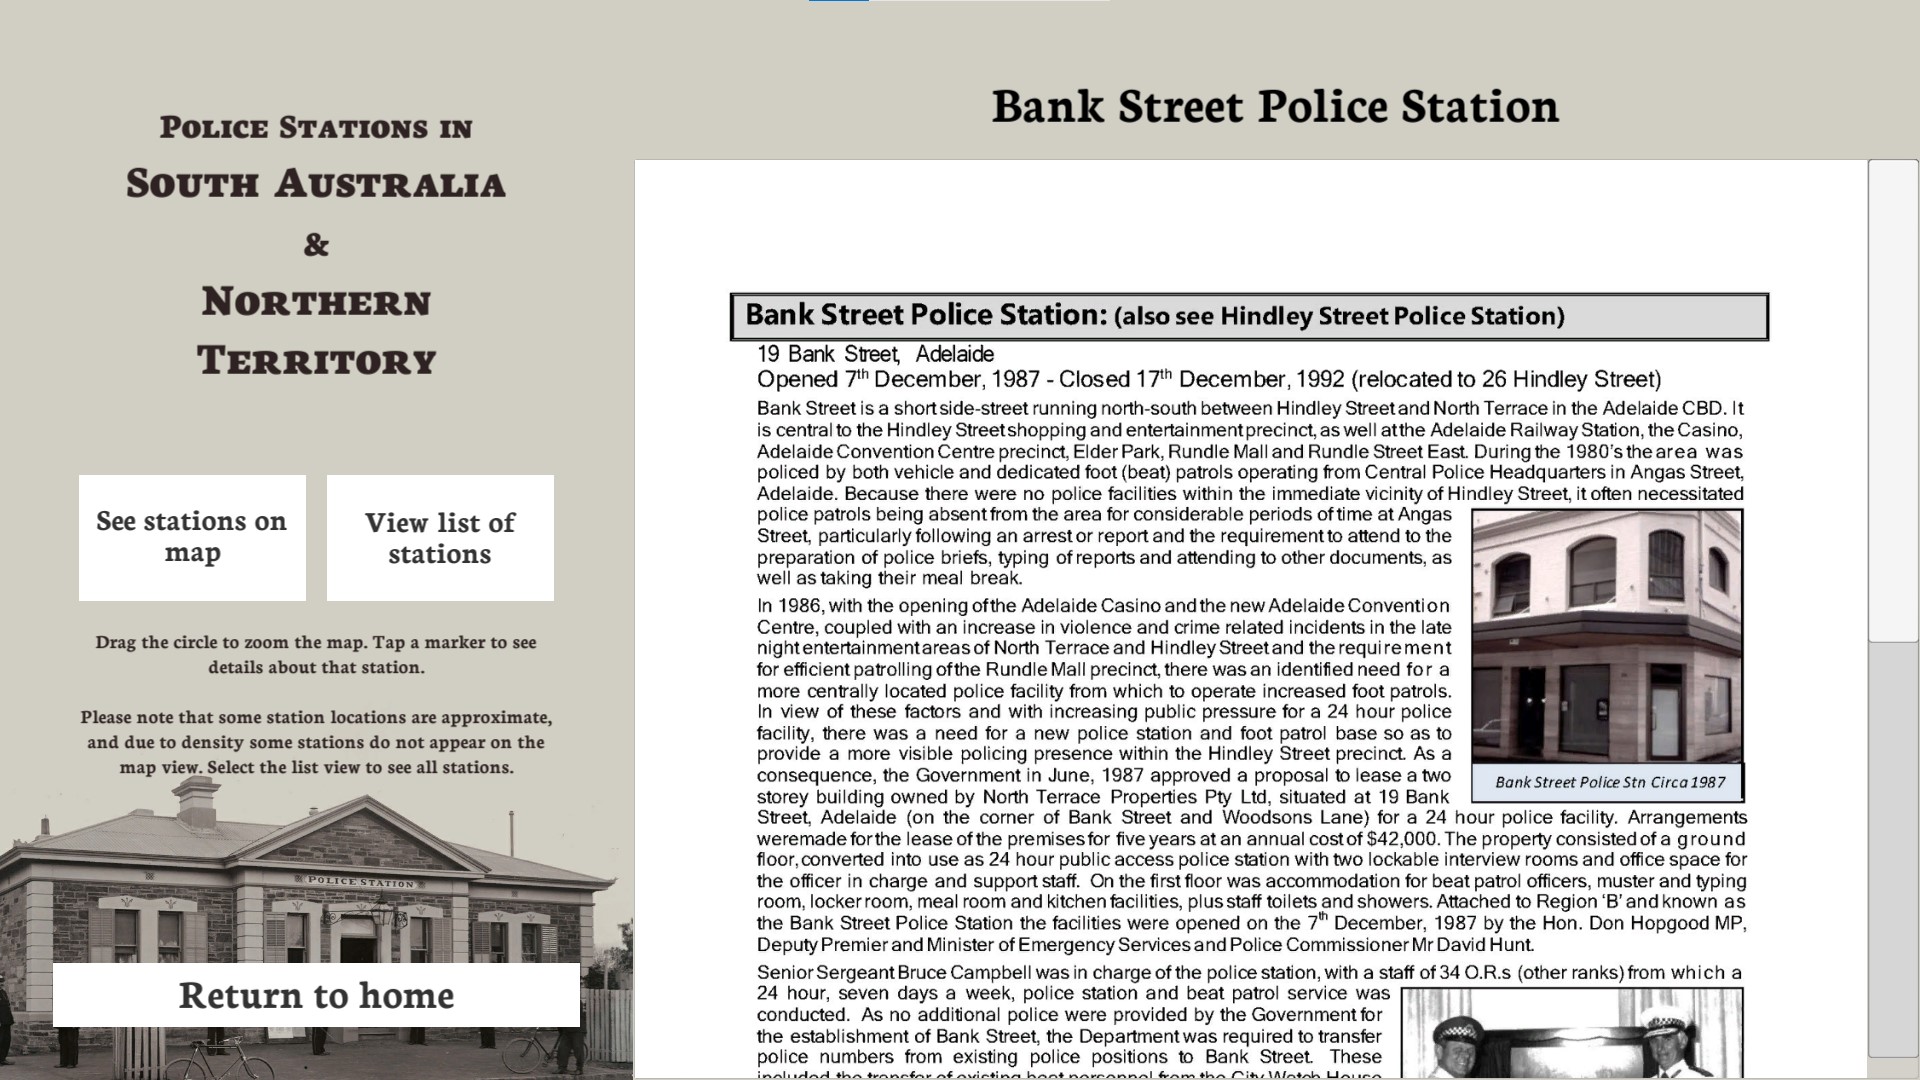 A screenshot of the station map museum kiosk, showing a text profile of Bank Street Police Station